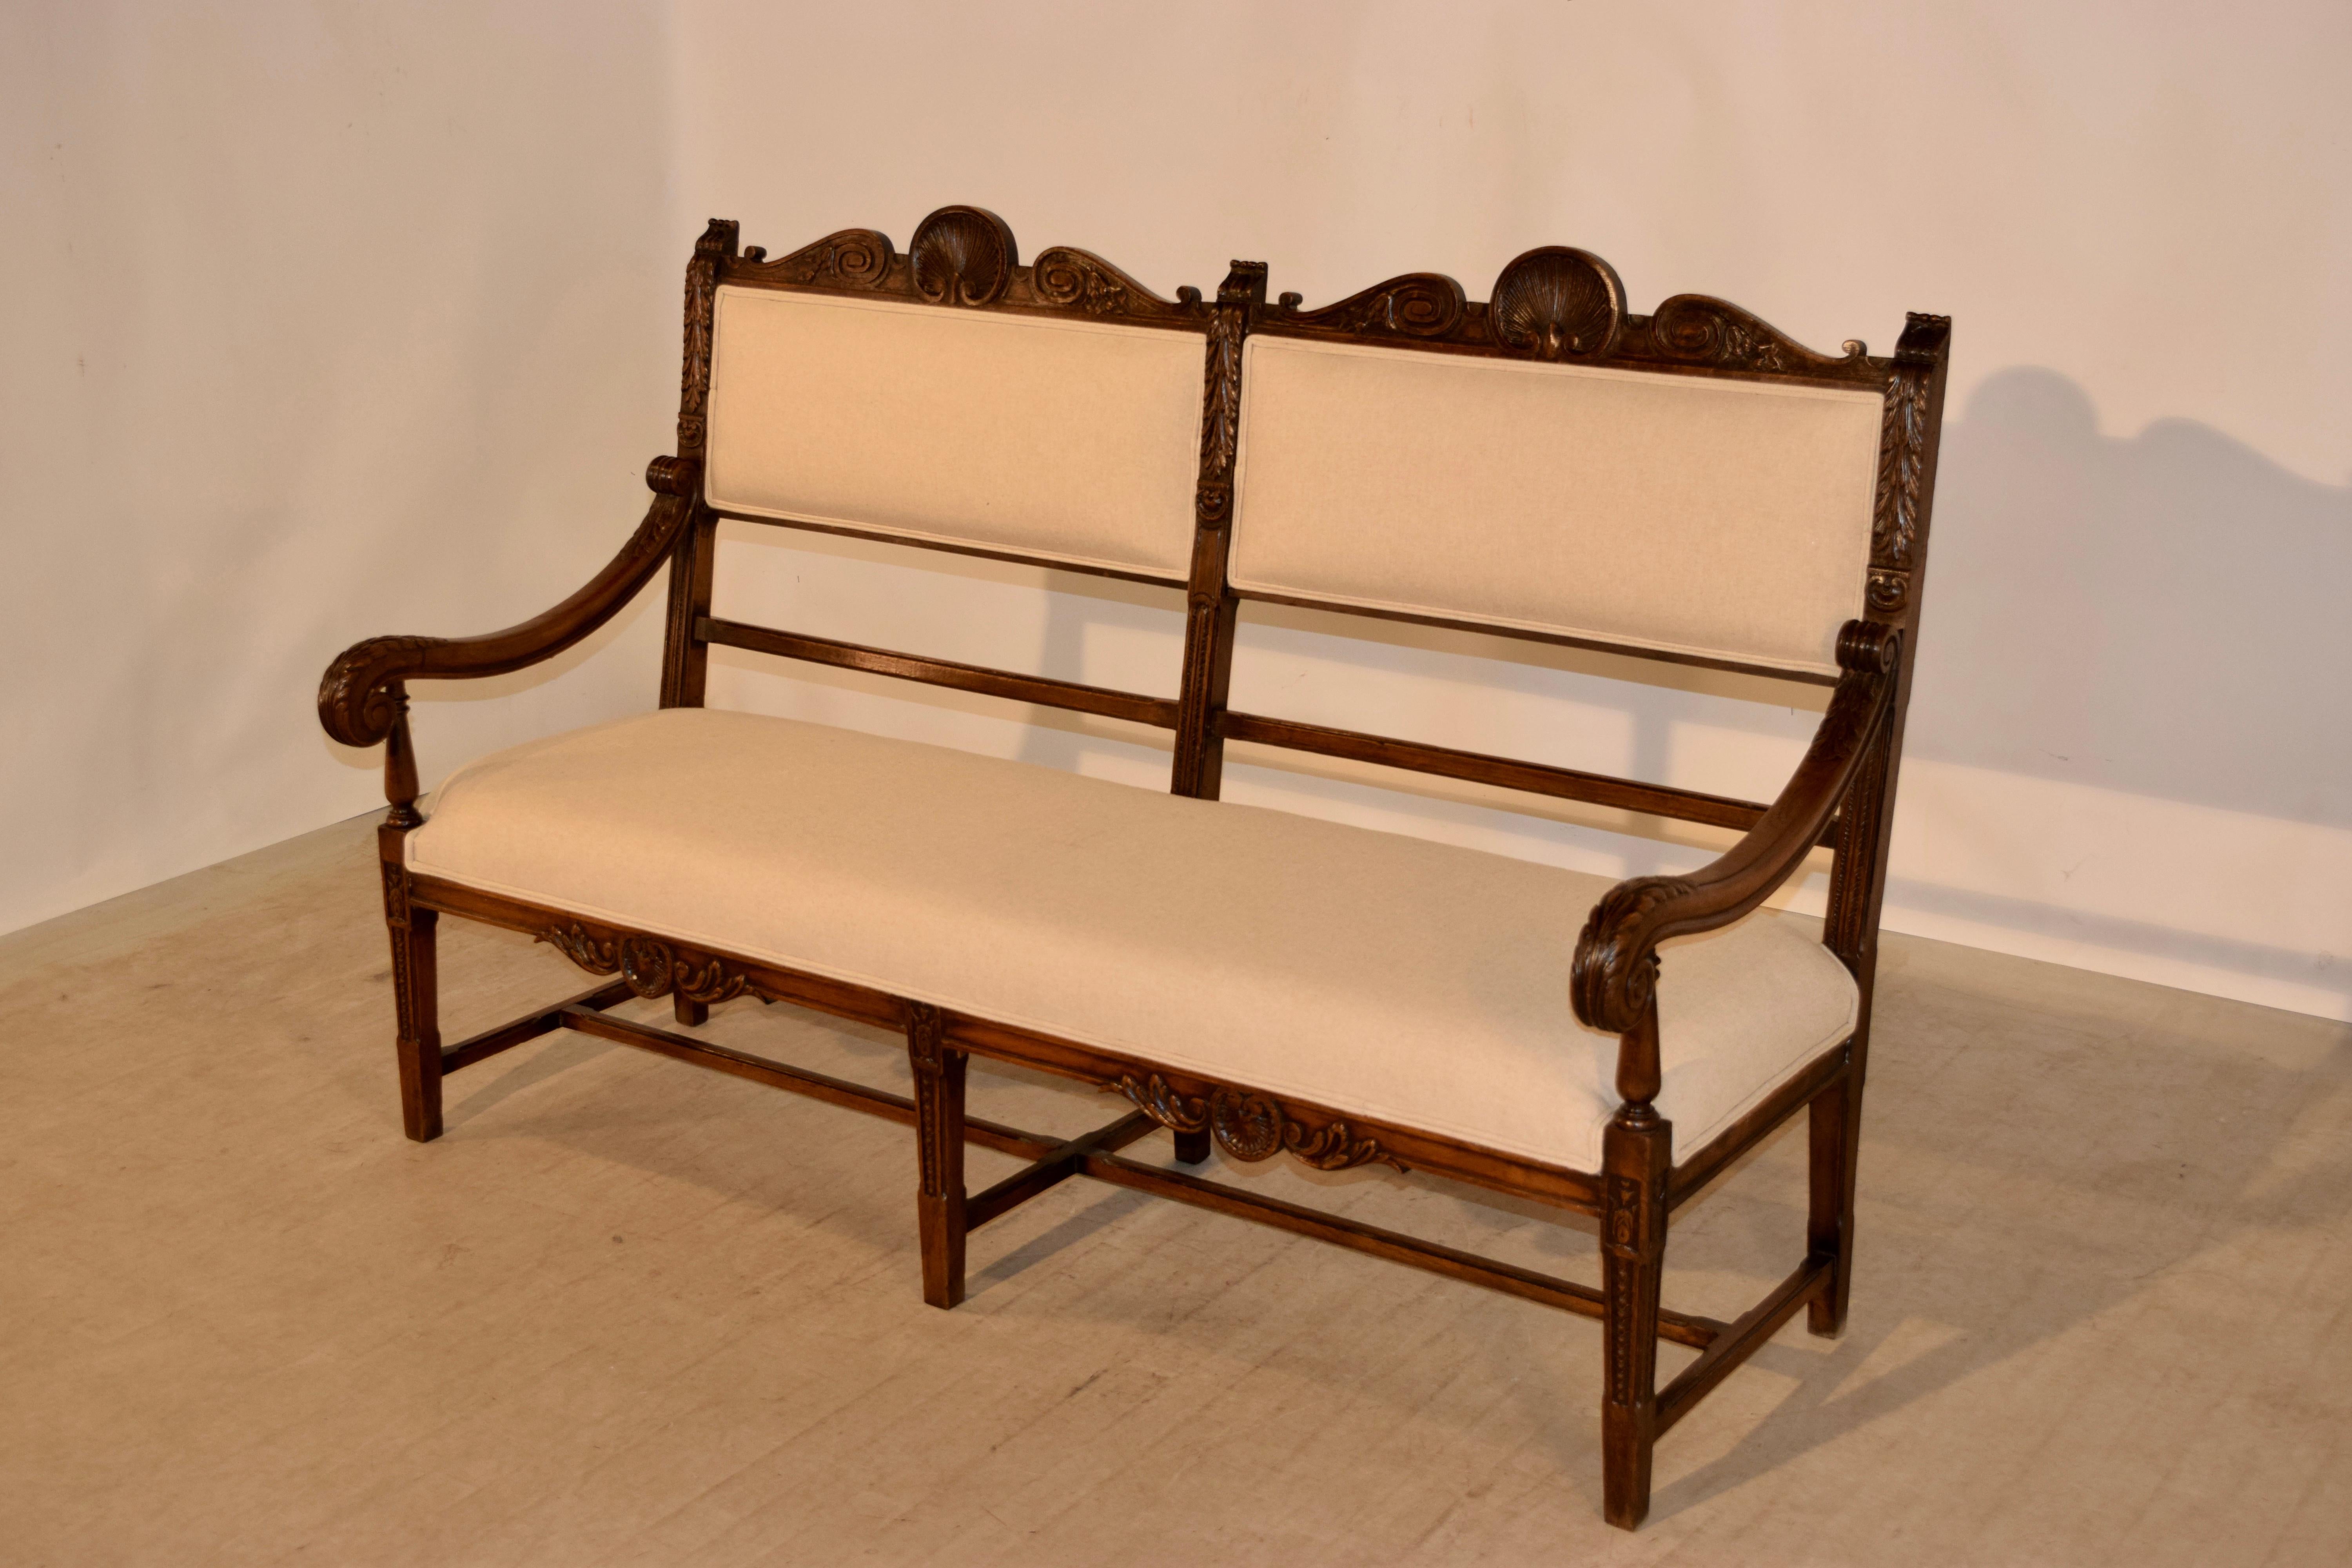 upholstered bench with back and arms